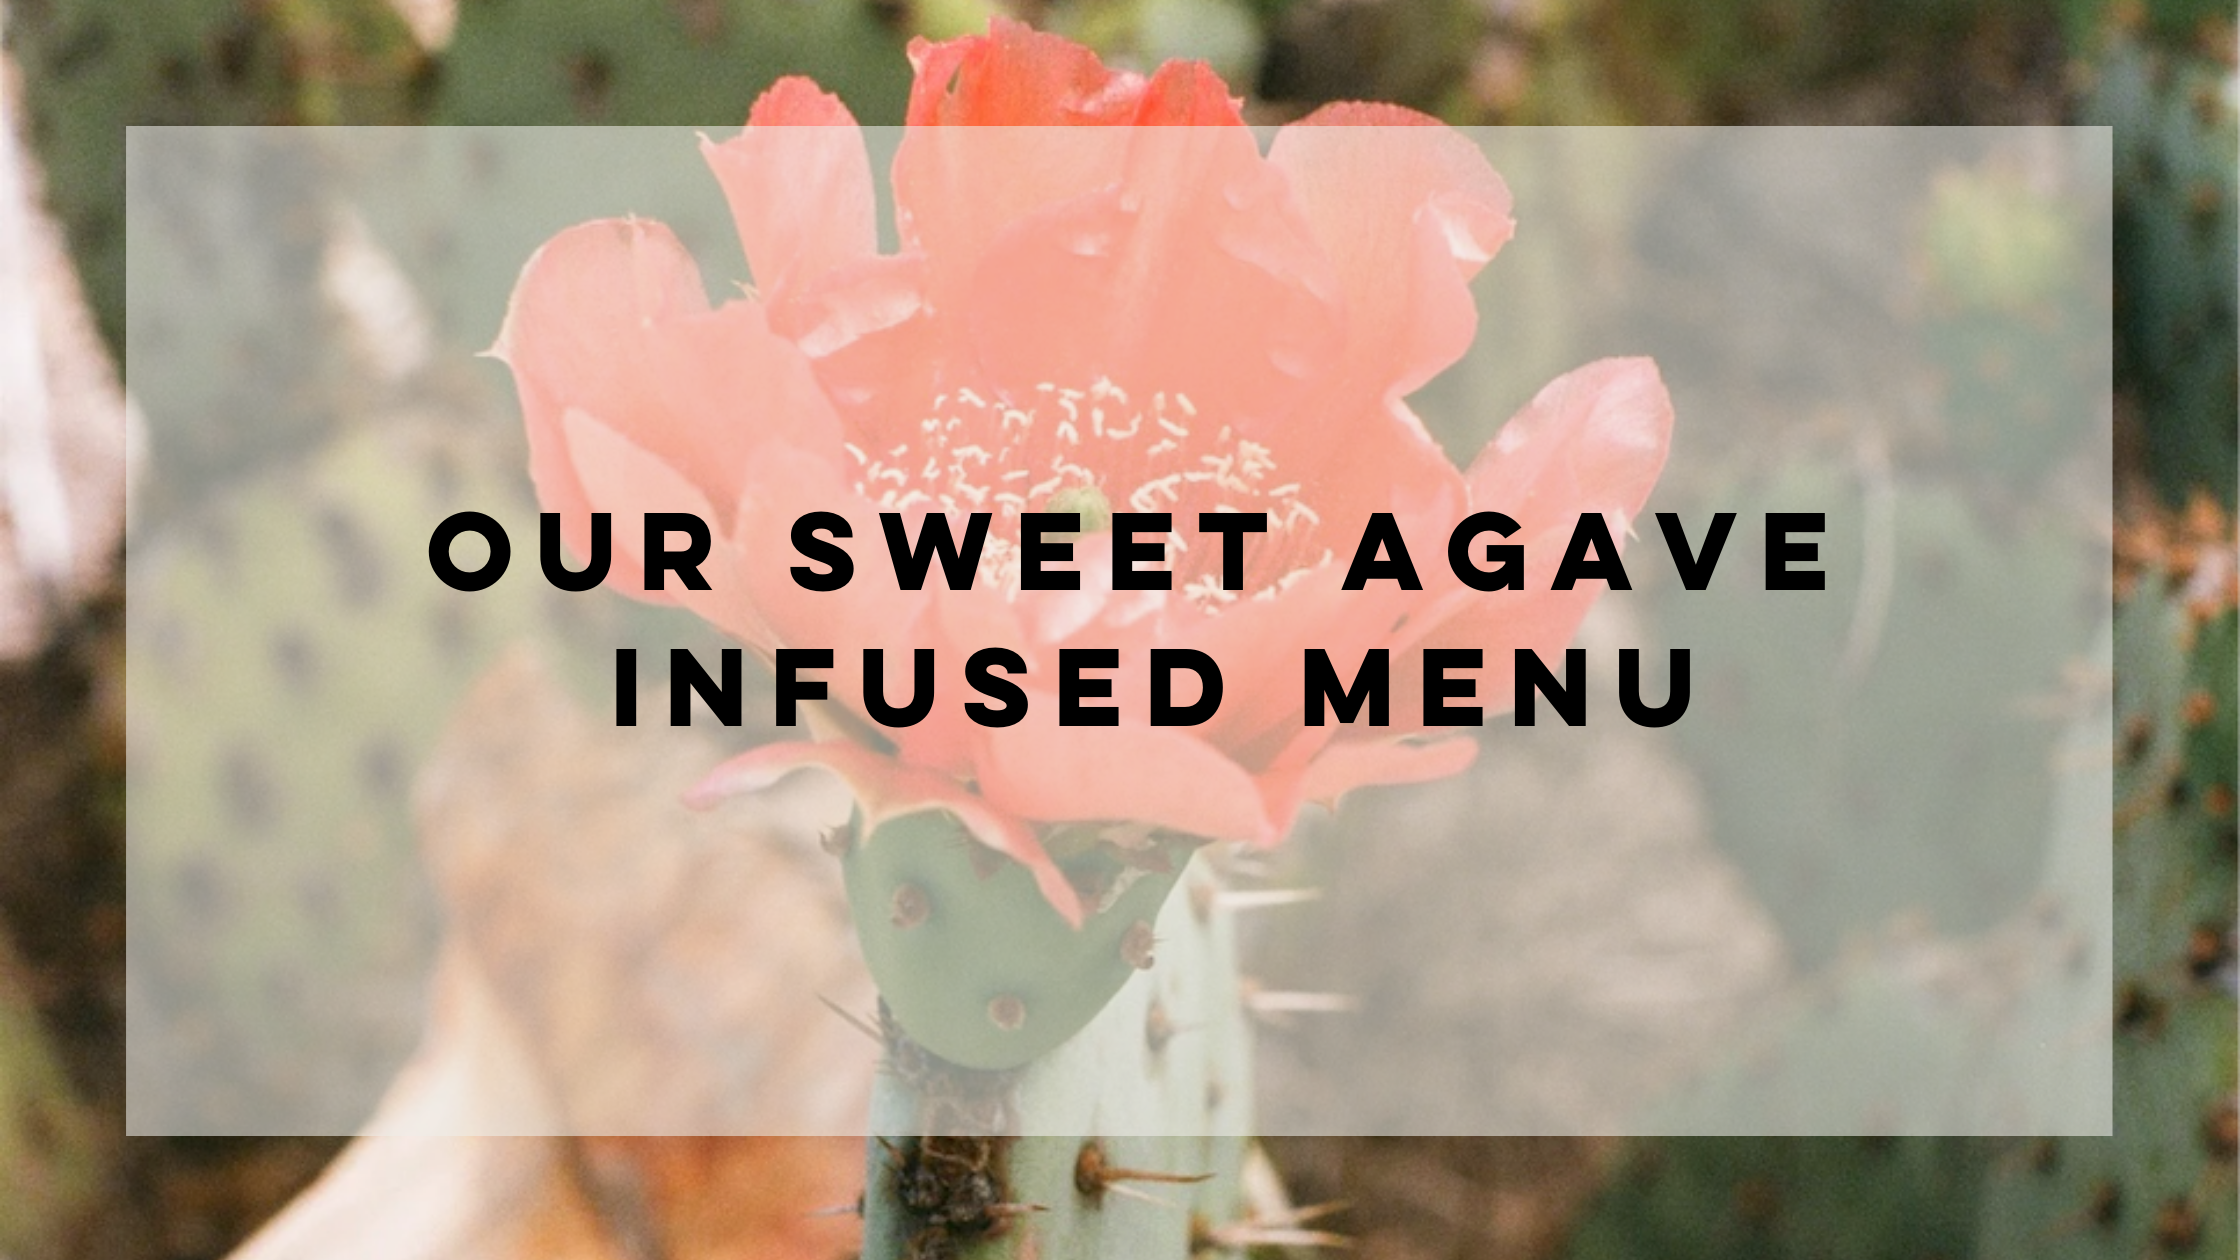 Noted Candles | Agave Menu Inspired By Cactus Flower Scent